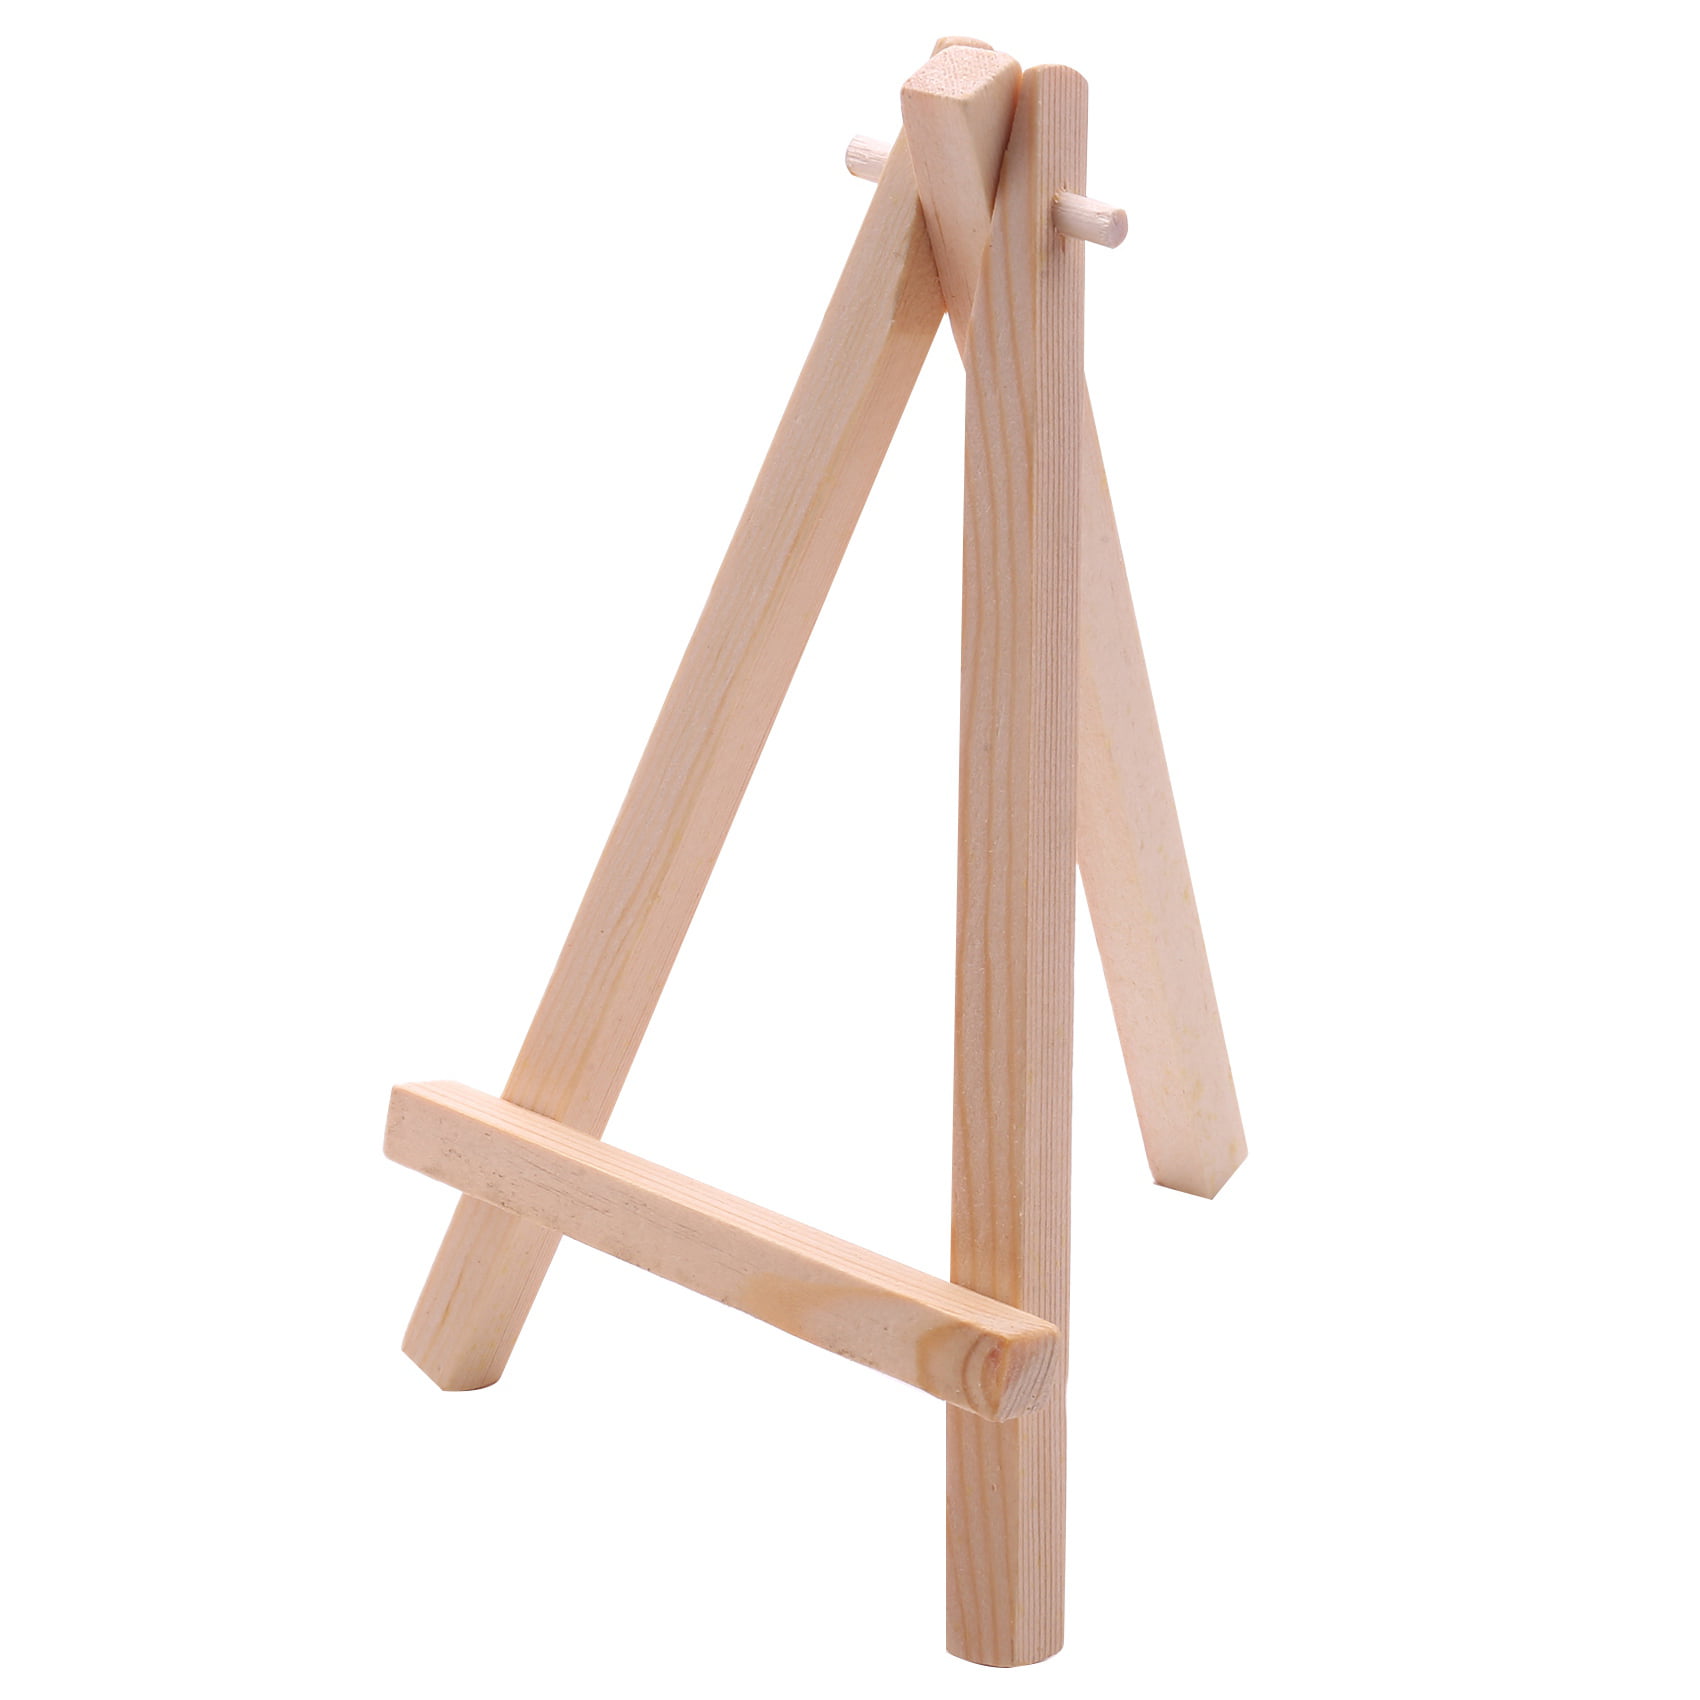 10pcs Wooden Display Easel Art Supply Tabletop Name Card Display Easel 